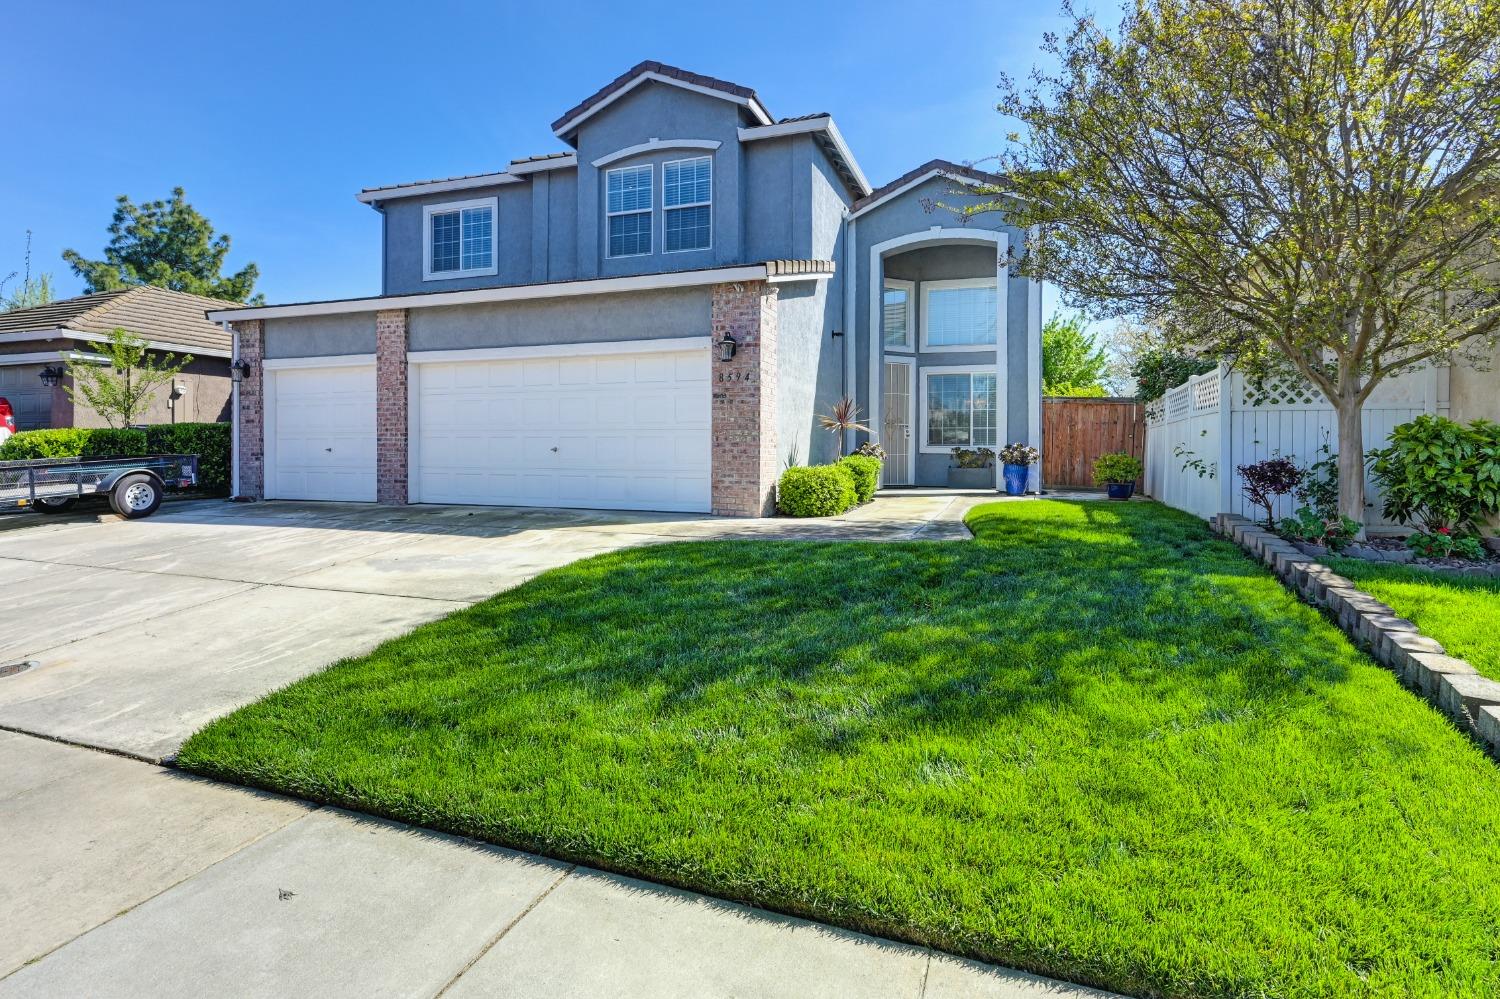 Front of house offers beautiful two-story home with 3 car Garage, 4 spaces in paved driveway, & nicely manicured front yard.